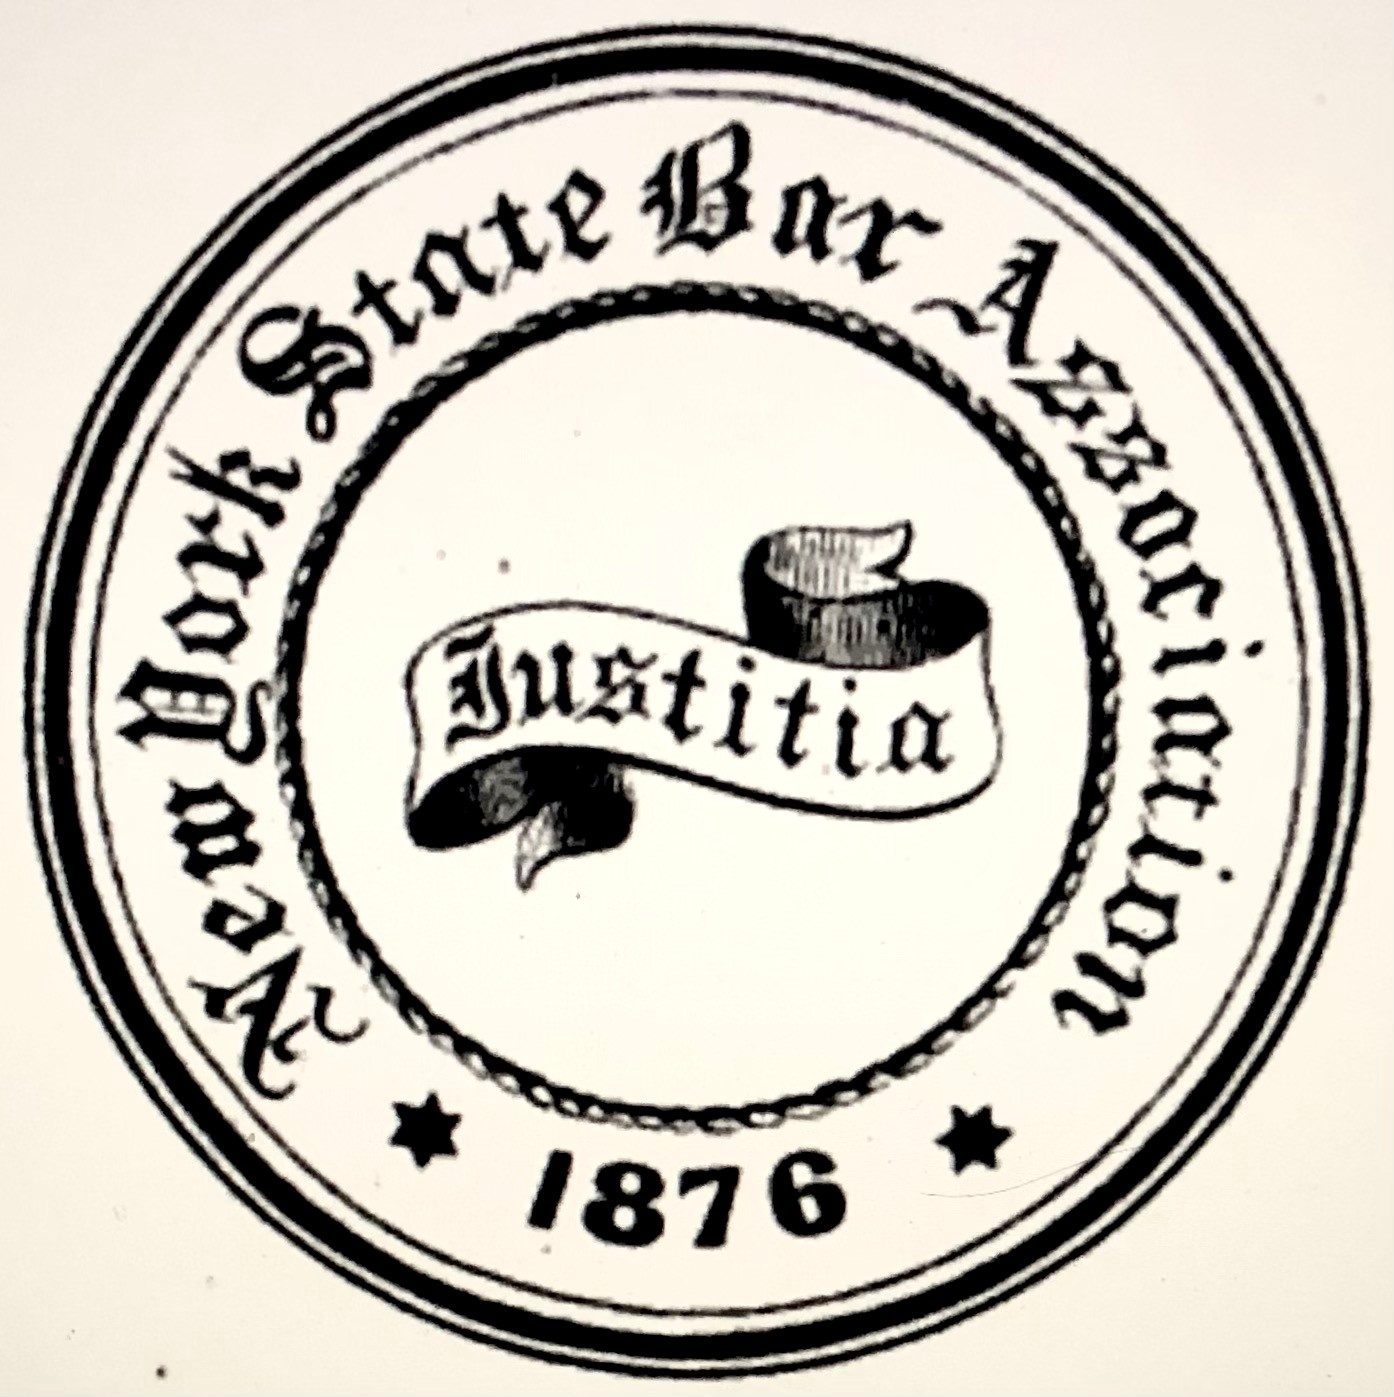 First logo of the New York State Bar Association, which remained in use until 1969